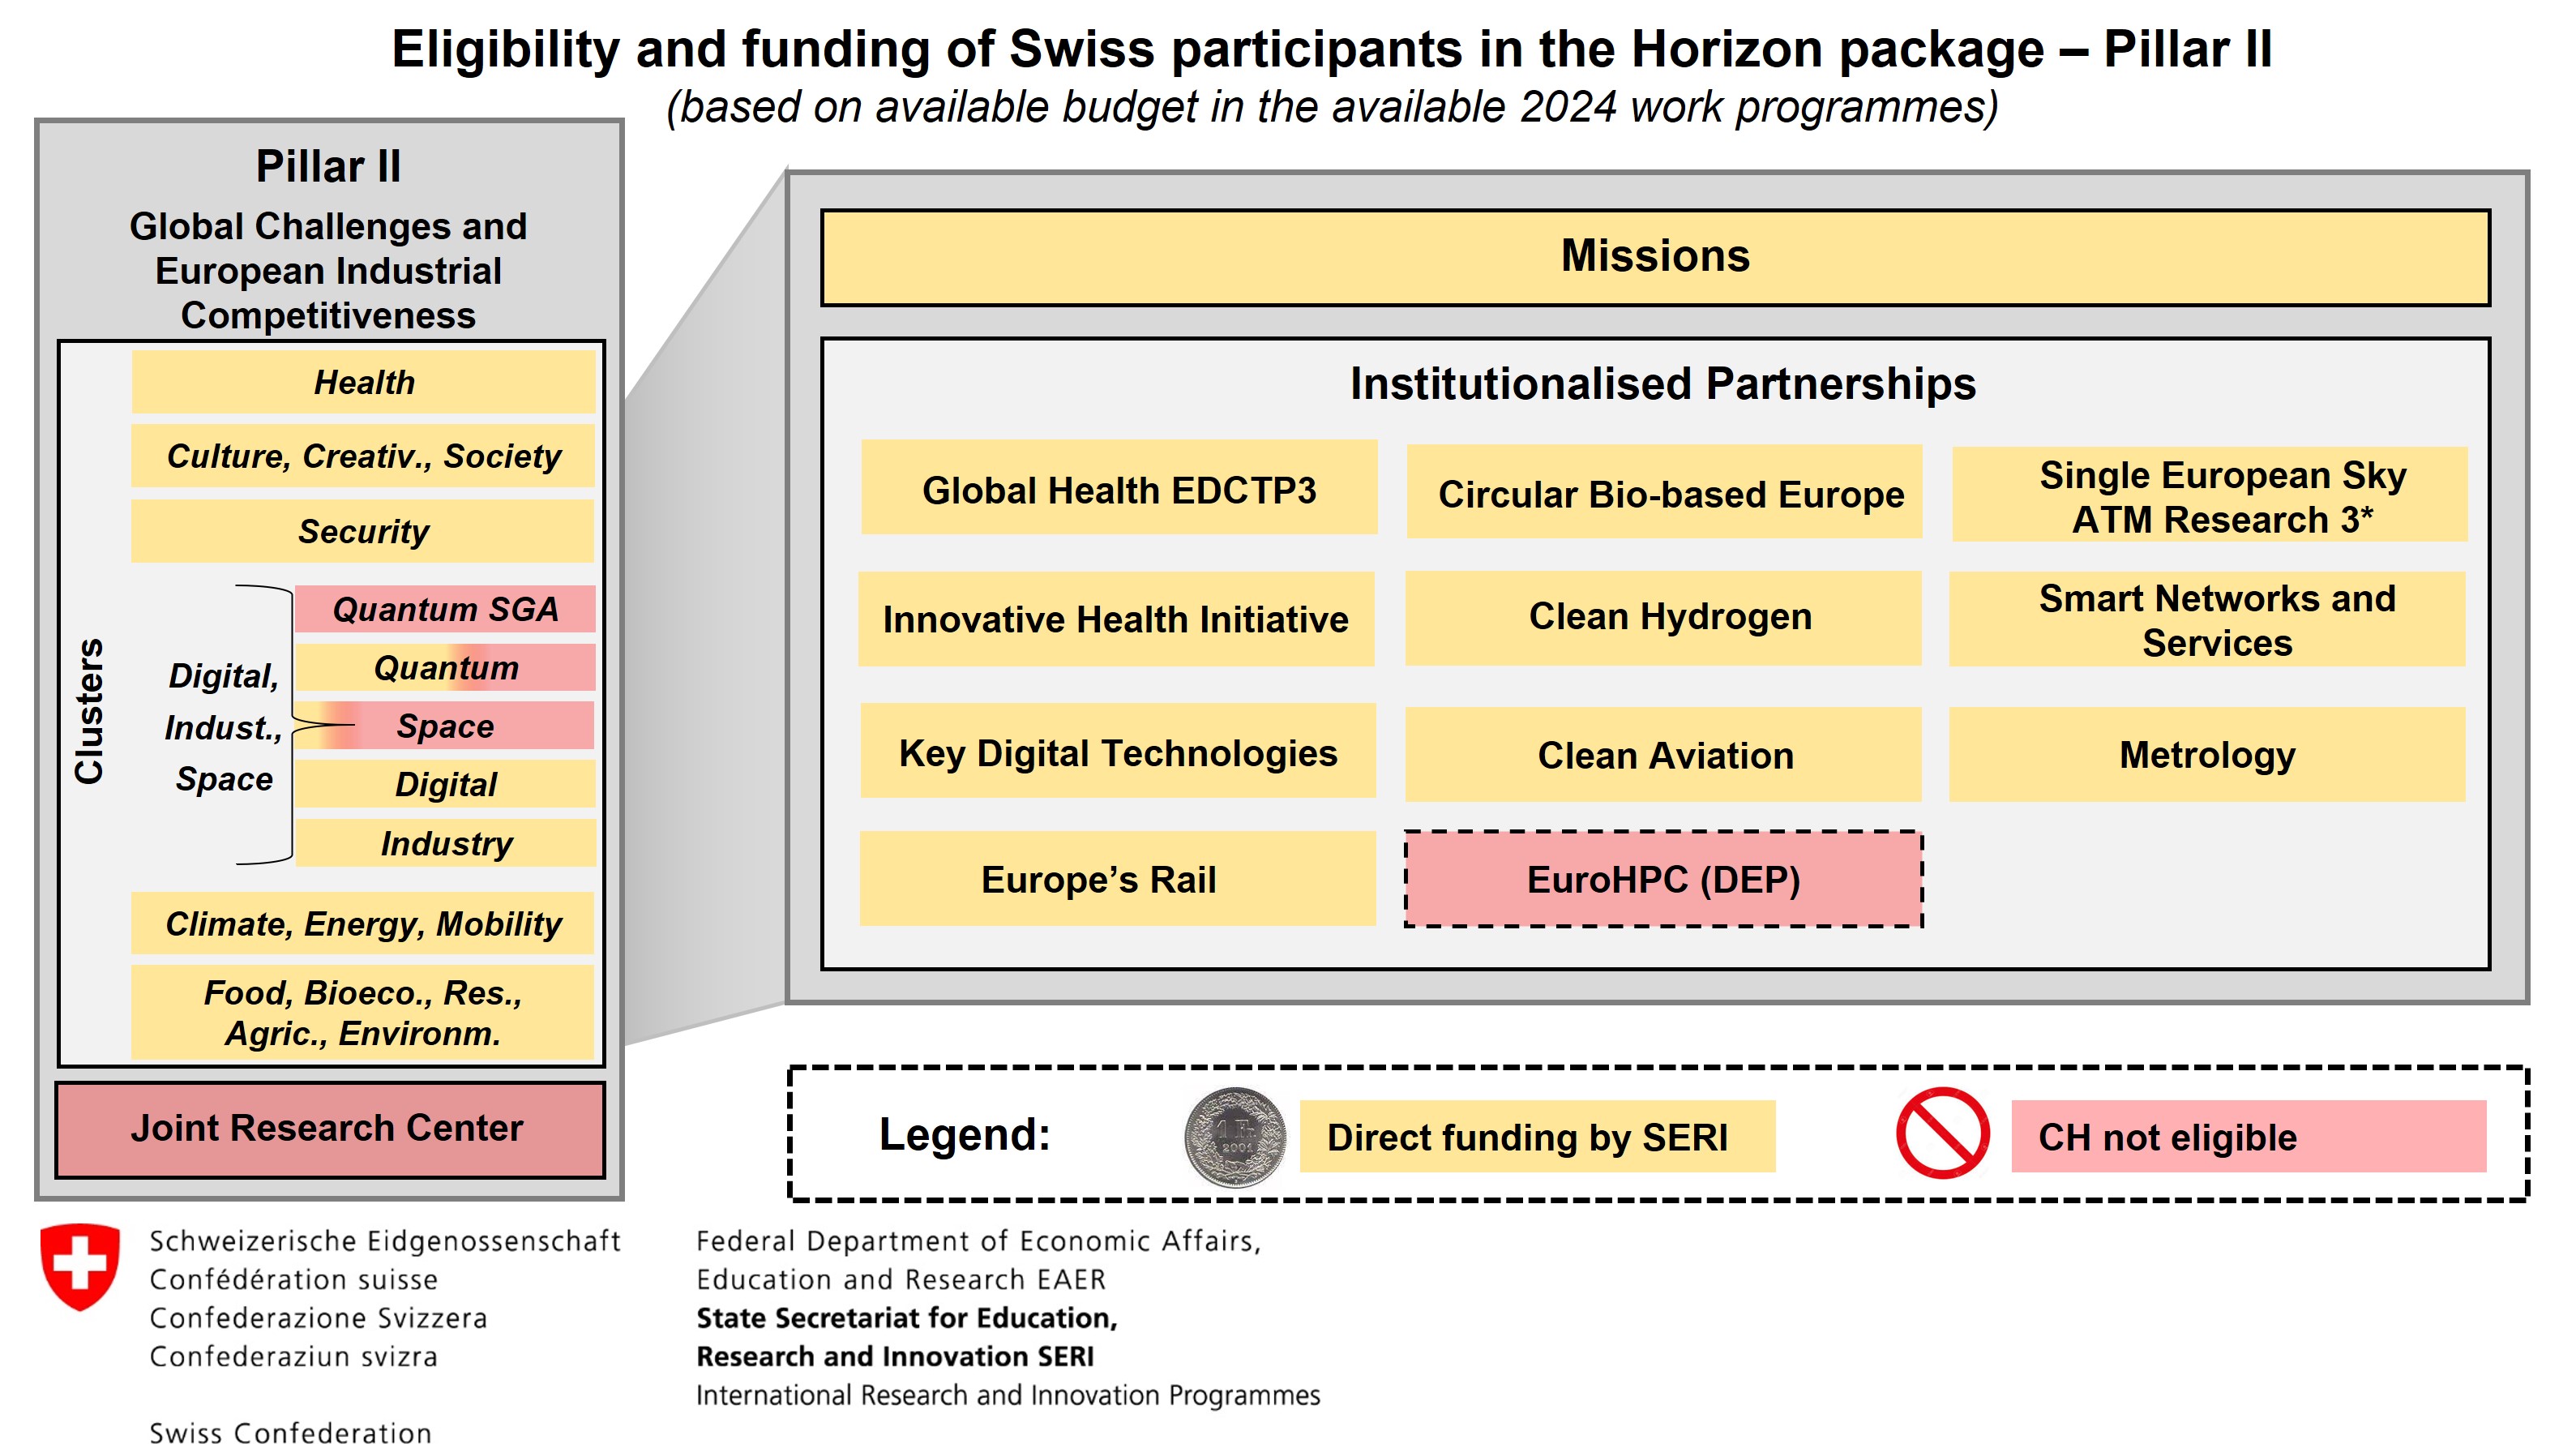 Eligibility and funding of Swiss participants in the Horizon Package – Pillar 2